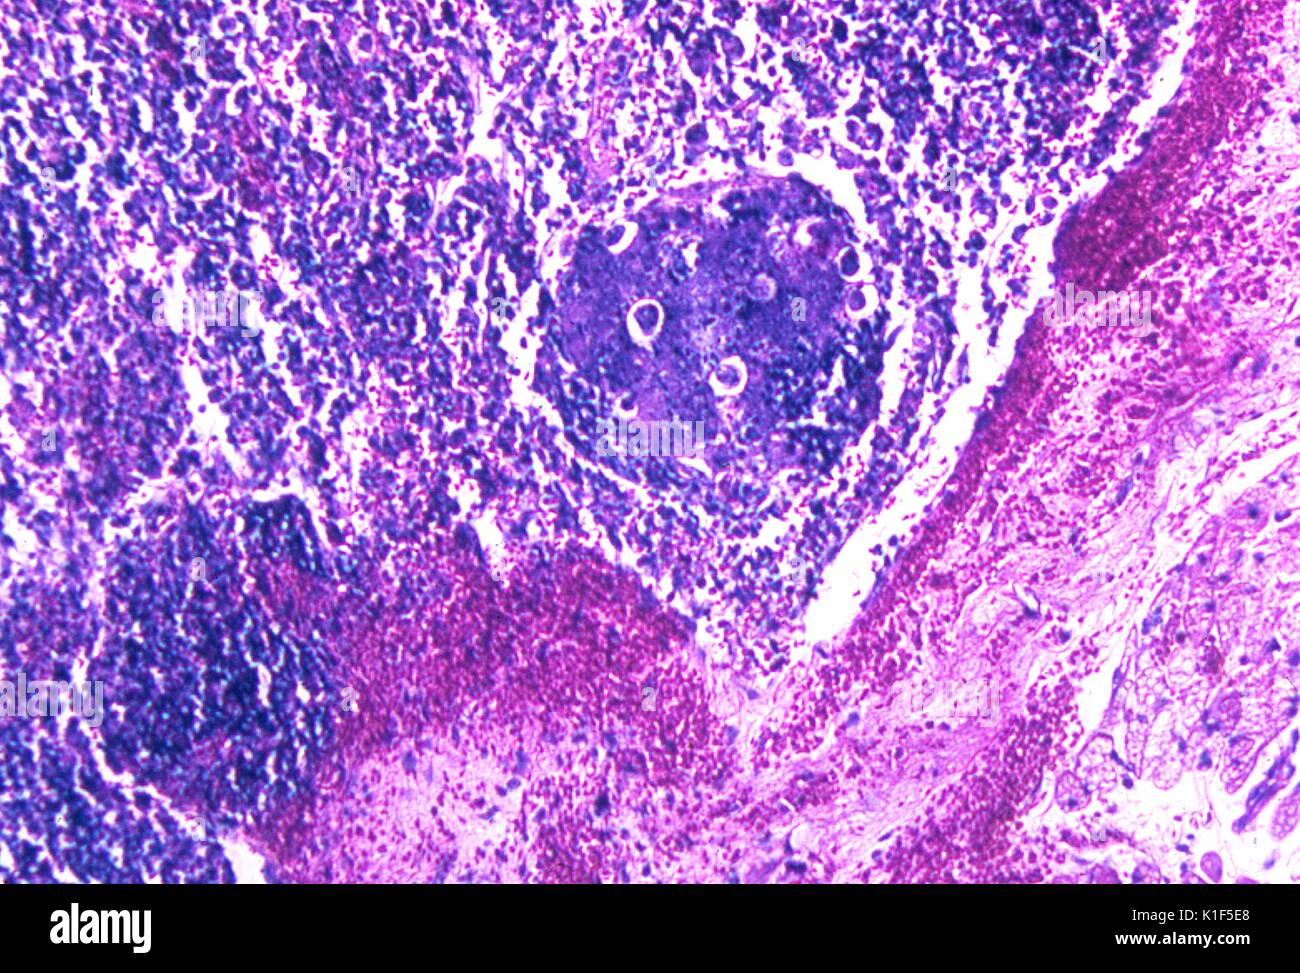 Hemorrhagic lymph node due to inhalation anthrax. Photomicrograph of mediastinal lymph node from a Cynomolgus monkey, ( Macaca fascicularis ). Moderate hemorrhage, necrosis, and edema are present. Giemsa stain, Mag. 125x. Image courtesy CDC/Dr. Ken Roberts, 1971. Stock Photo